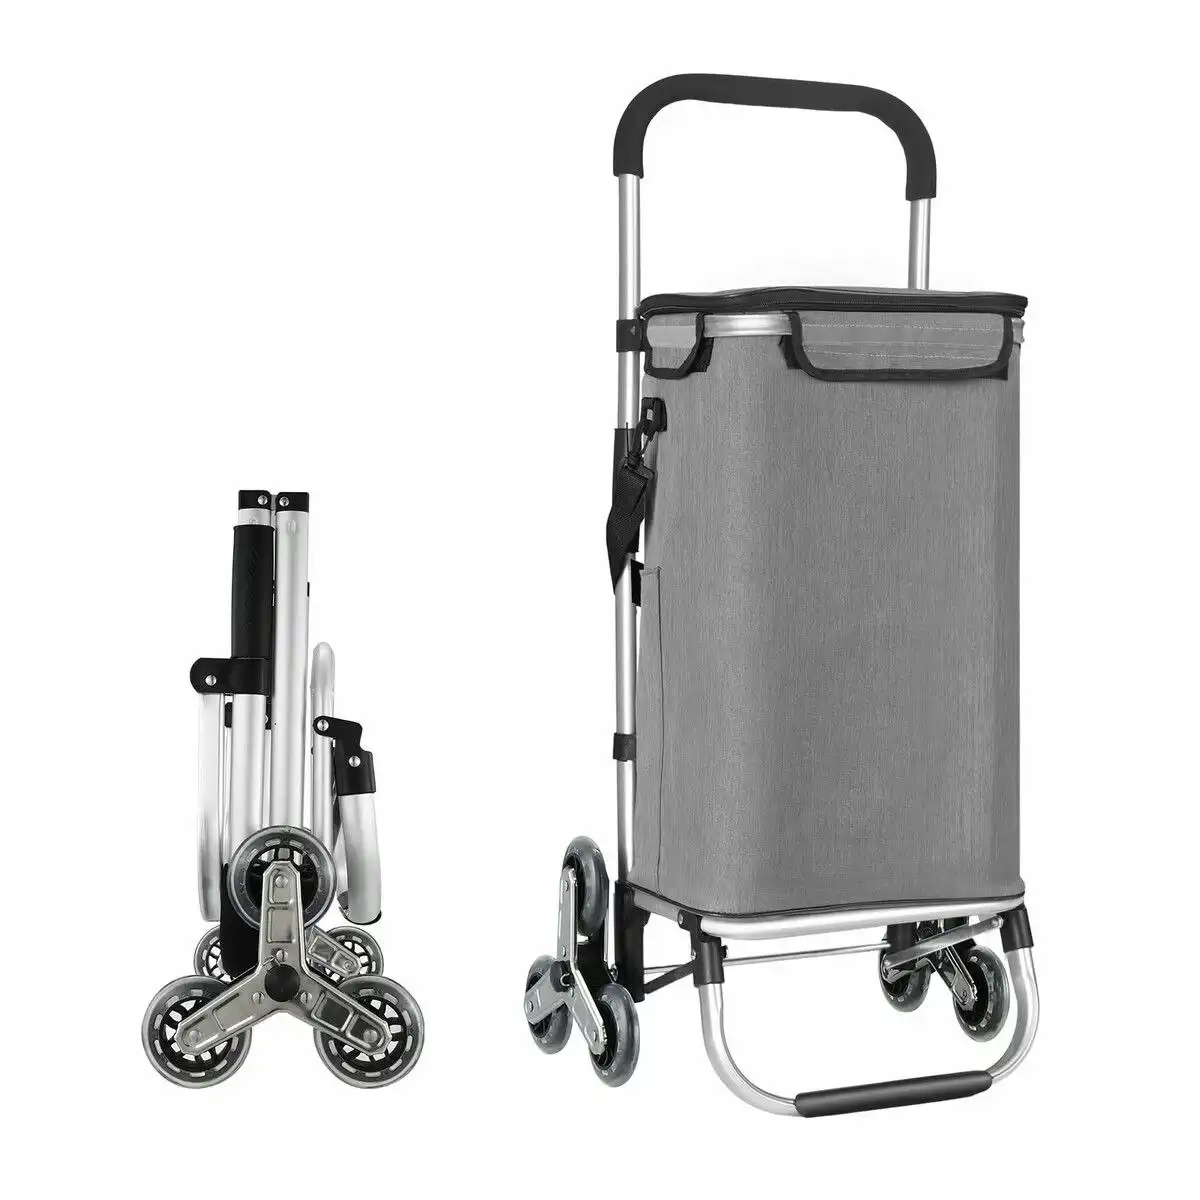 LUXSUITE Shopping Trolley Cart Wheeled Bag Storage Trolly Foldable Grocery Market Utility Granny Stair Climbing Wheels Aluminium 45kg